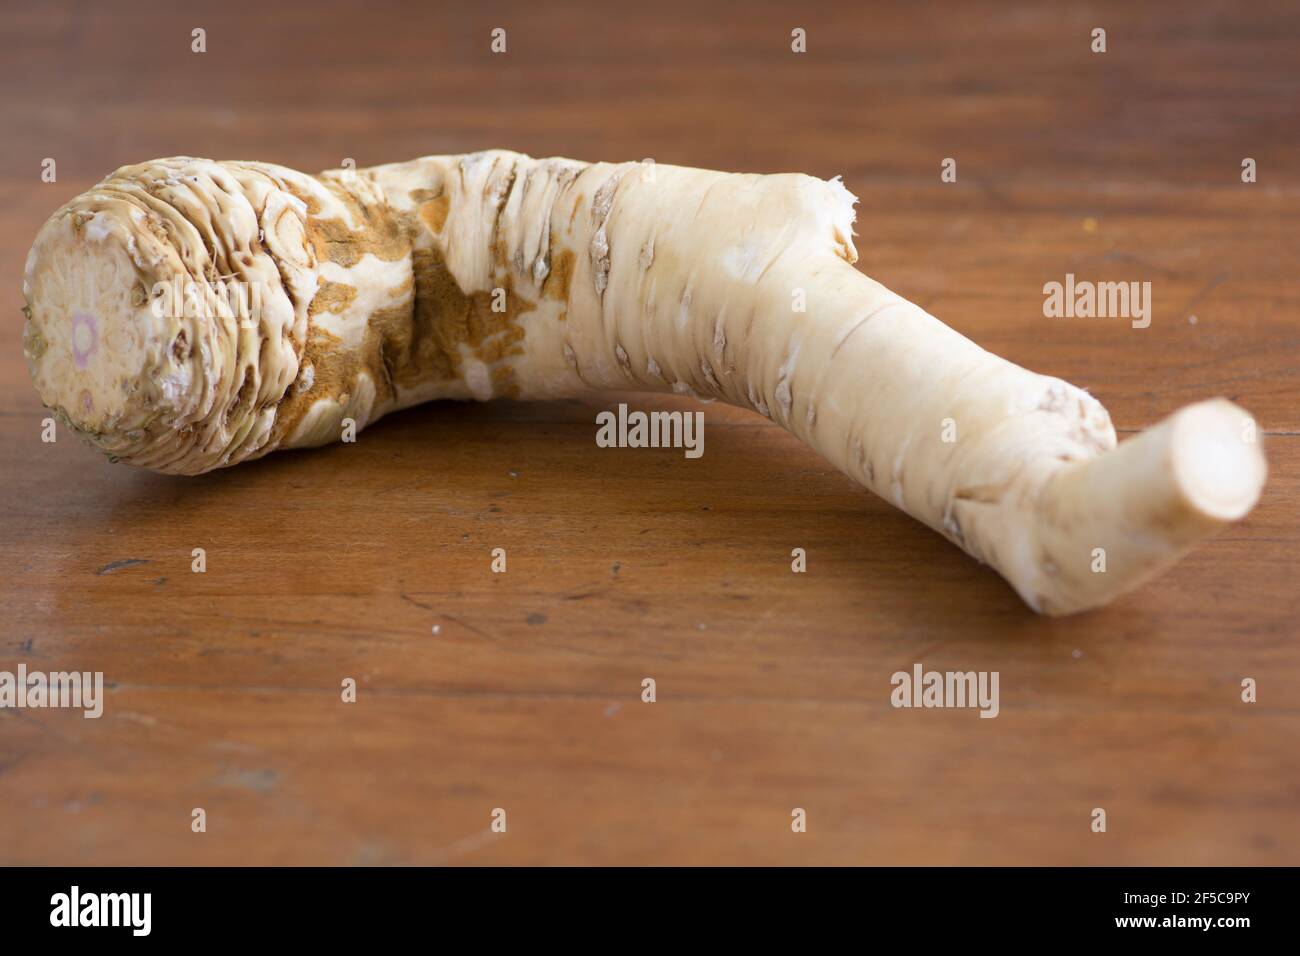 Close up of an Horseradish (Armoracia rusticana, syn. Cochlearia armoracia) root vegetable, cultivated and used worldwide as a spice and as a condimen Stock Photo